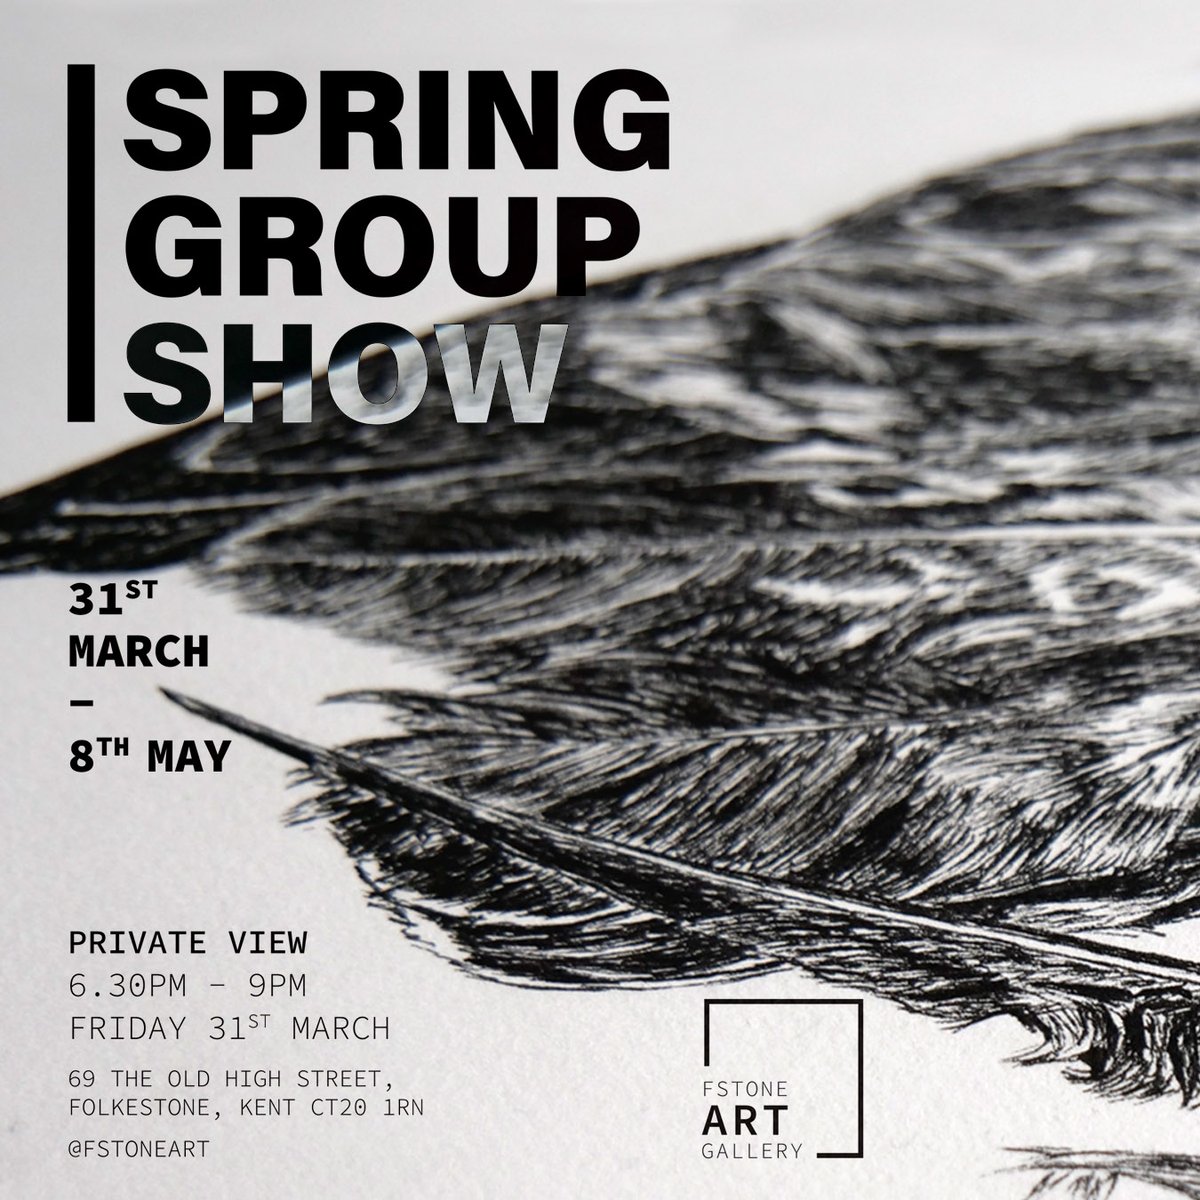 Two Bank Holiday weekends left to catch 'Spring Group Show' at Folkestone Art Gallery, and see my drawing on display

Open 11am-5pm Wed - Sun
69 The Old High Street, Folkestone, Kent CT20 1RN
#artexhibition #artgallery #artshow #spring #groupshow #exhibition #kentart #folkestone